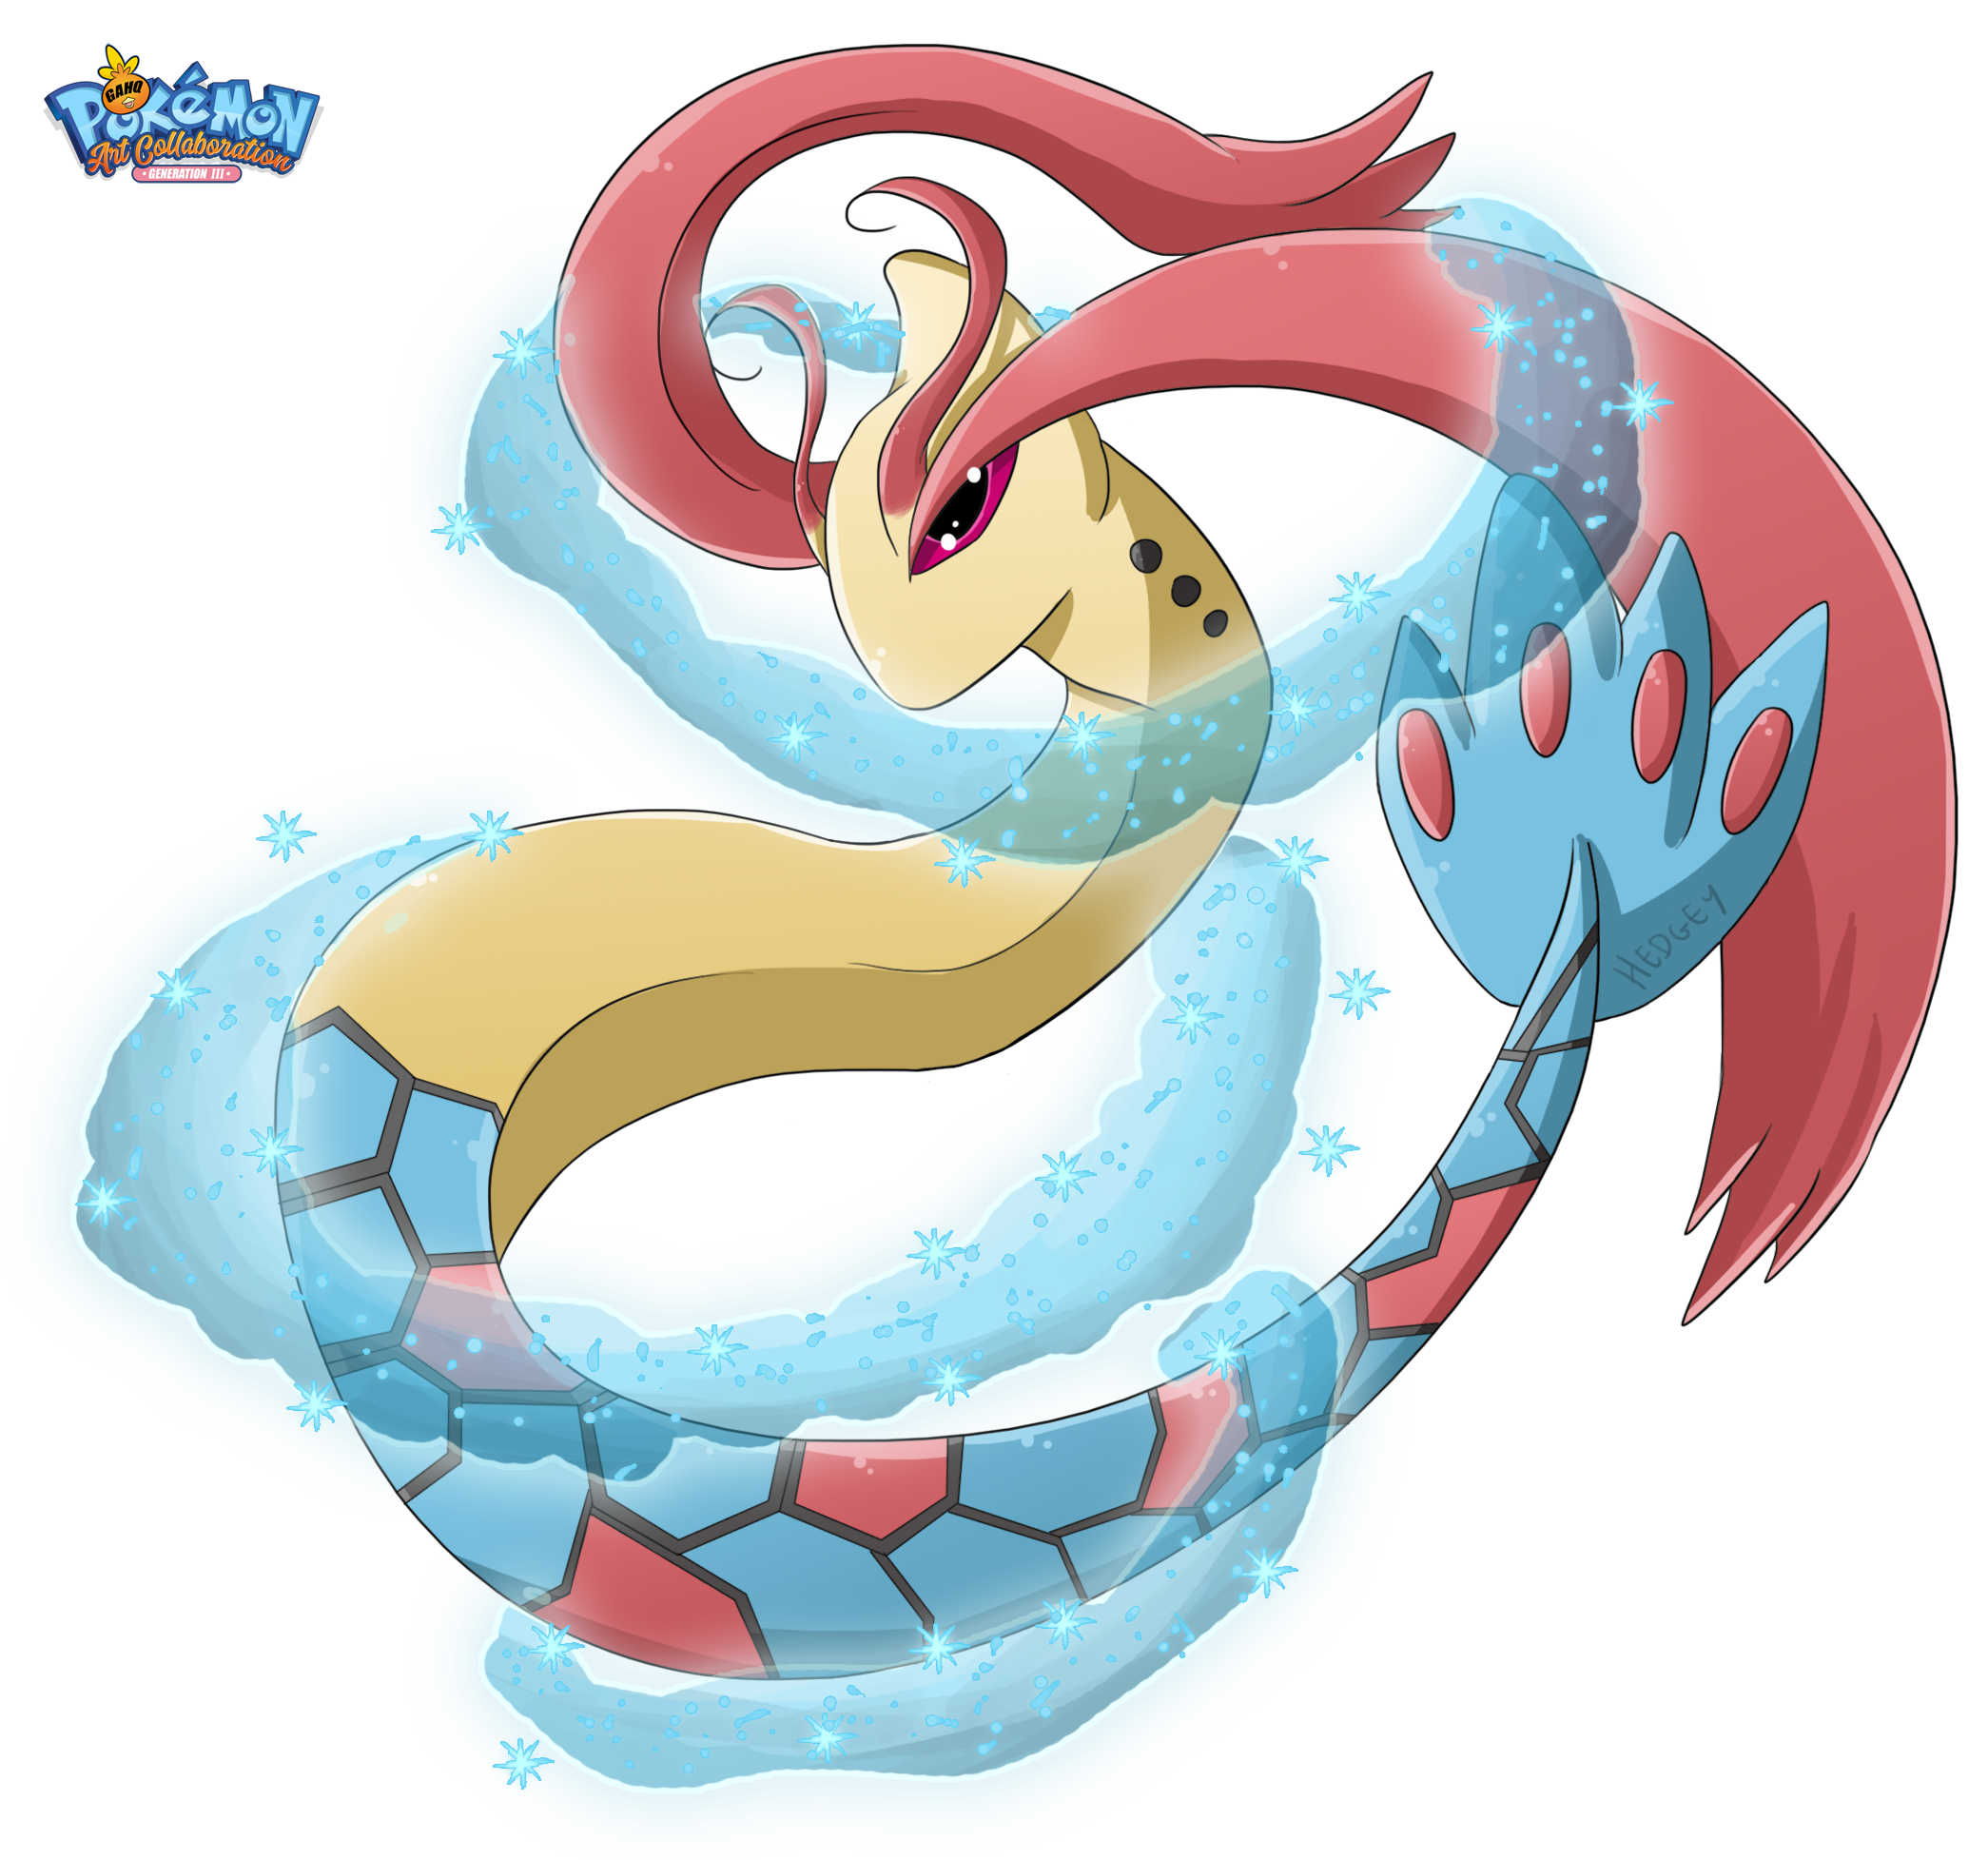 #350 Milotic used Aqua Ring and Recover in our Pokemon Generation III Art T...